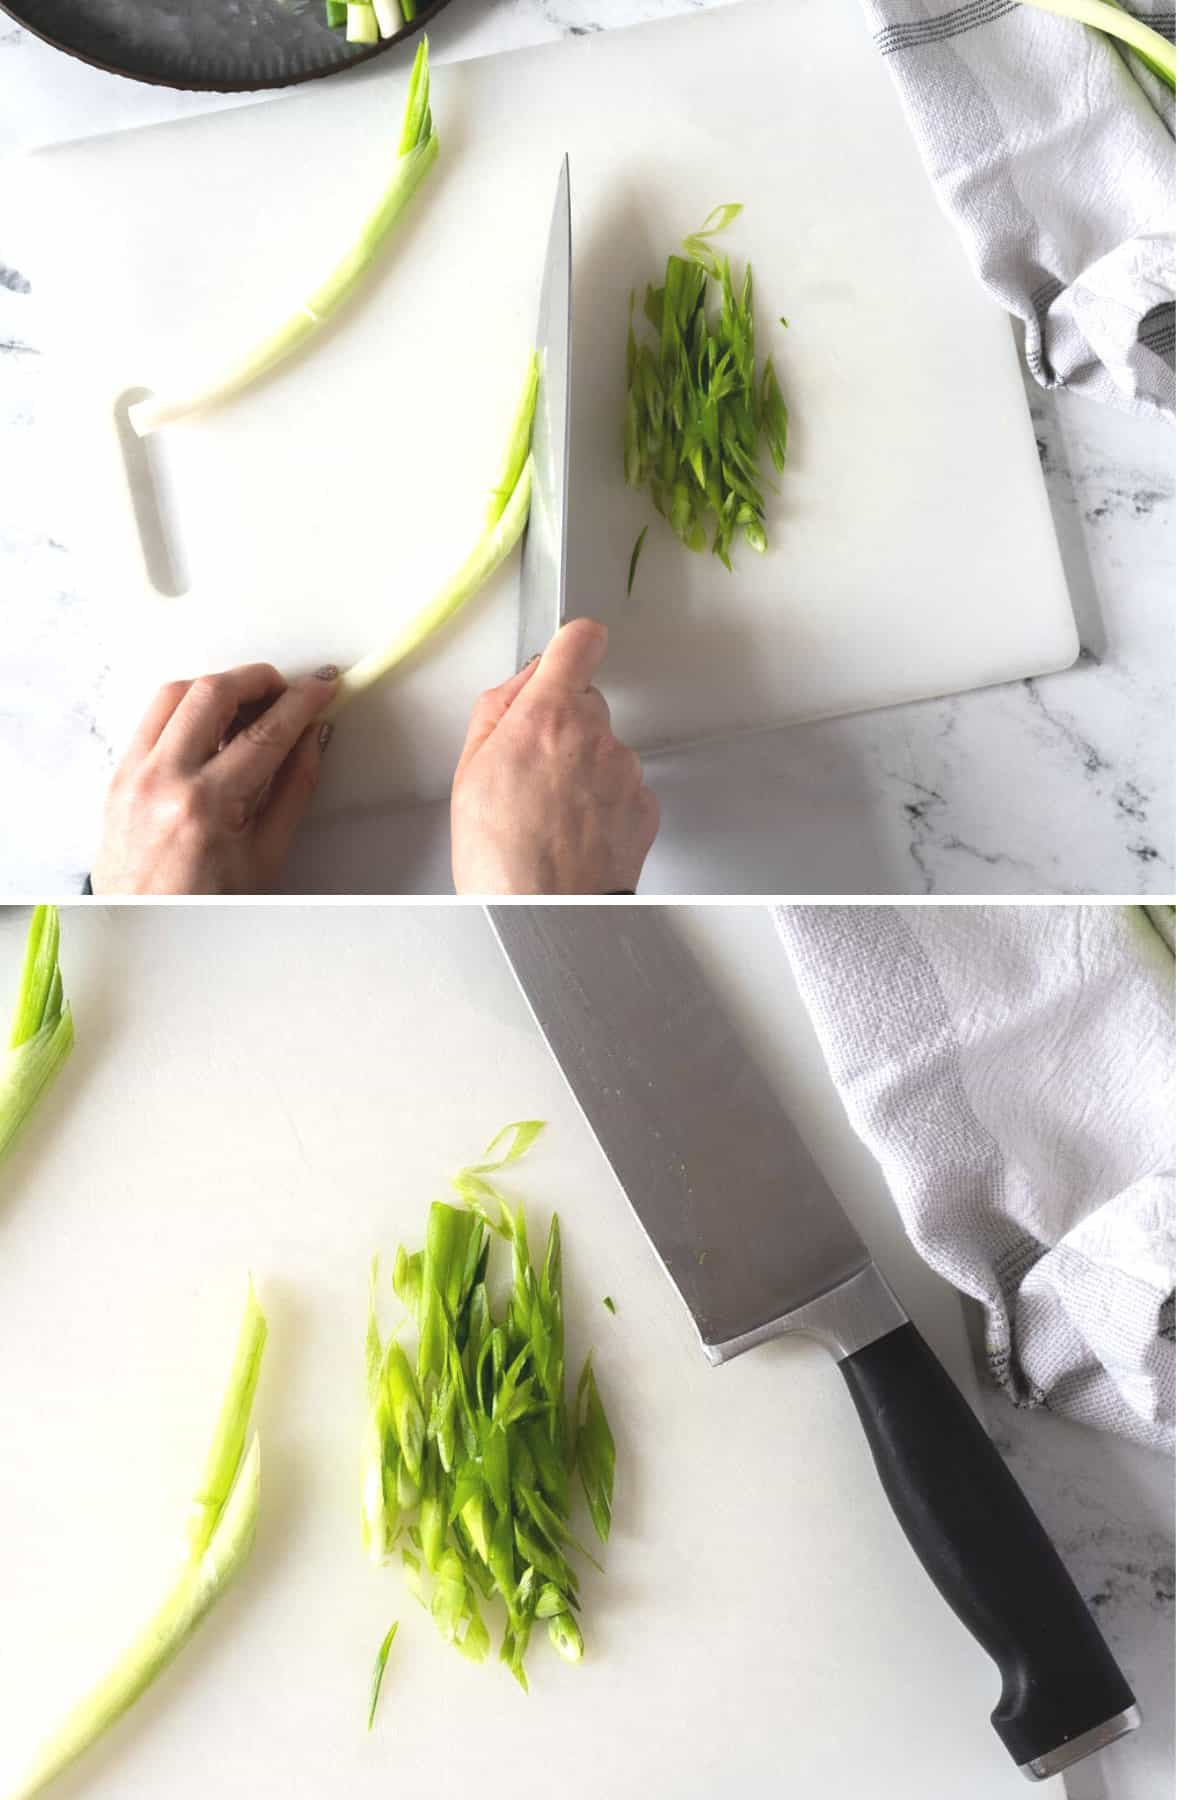 Slicing a scallion into thin strips.